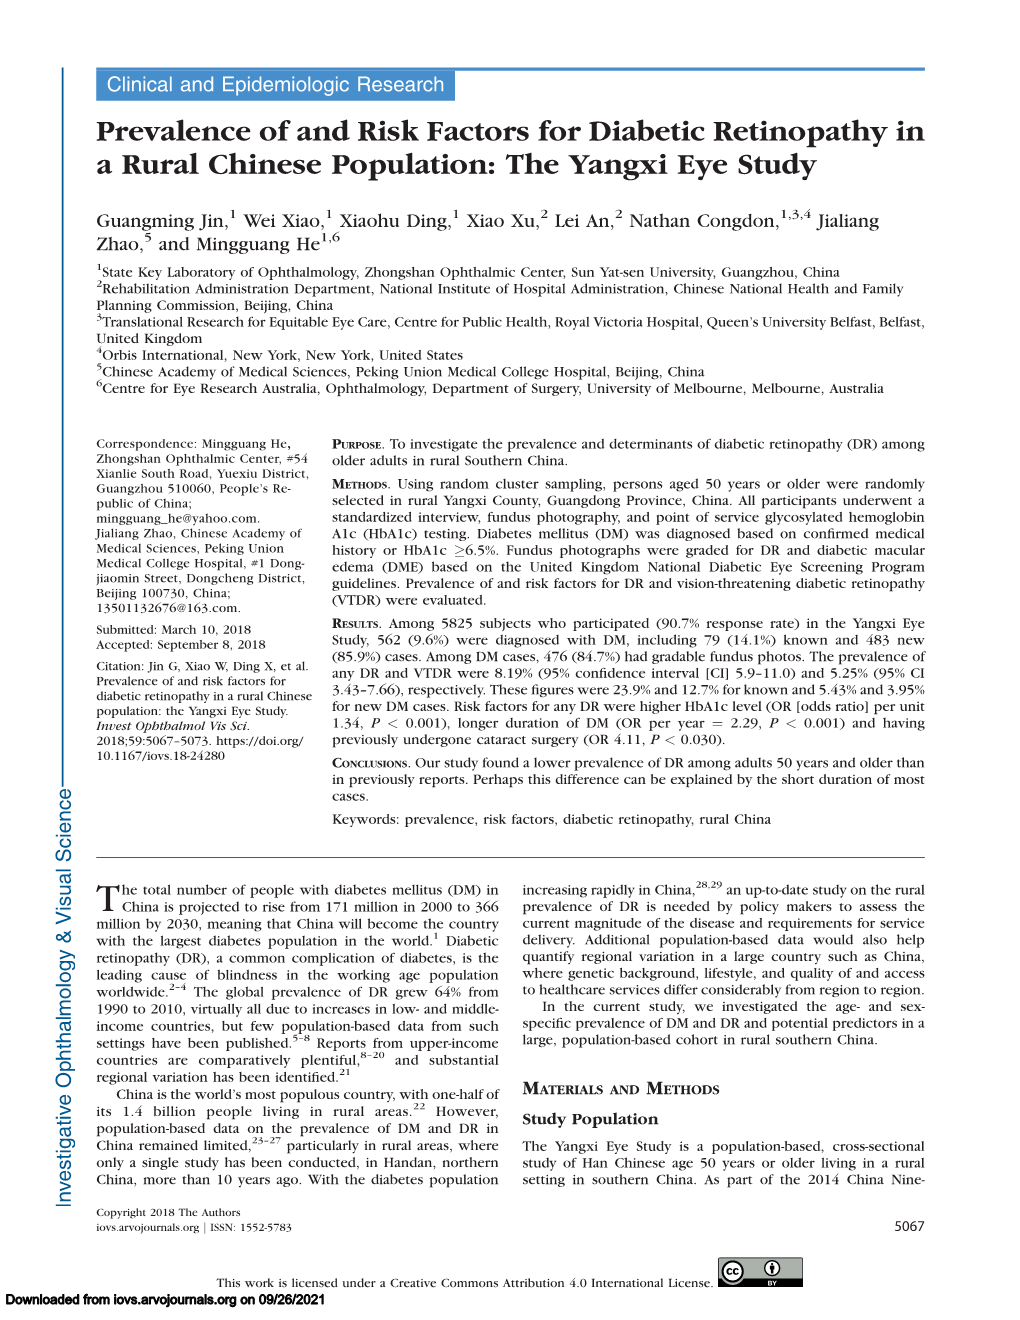 Prevalence of and Risk Factors for Diabetic Retinopathy in a Rural Chinese Population: the Yangxi Eye Study